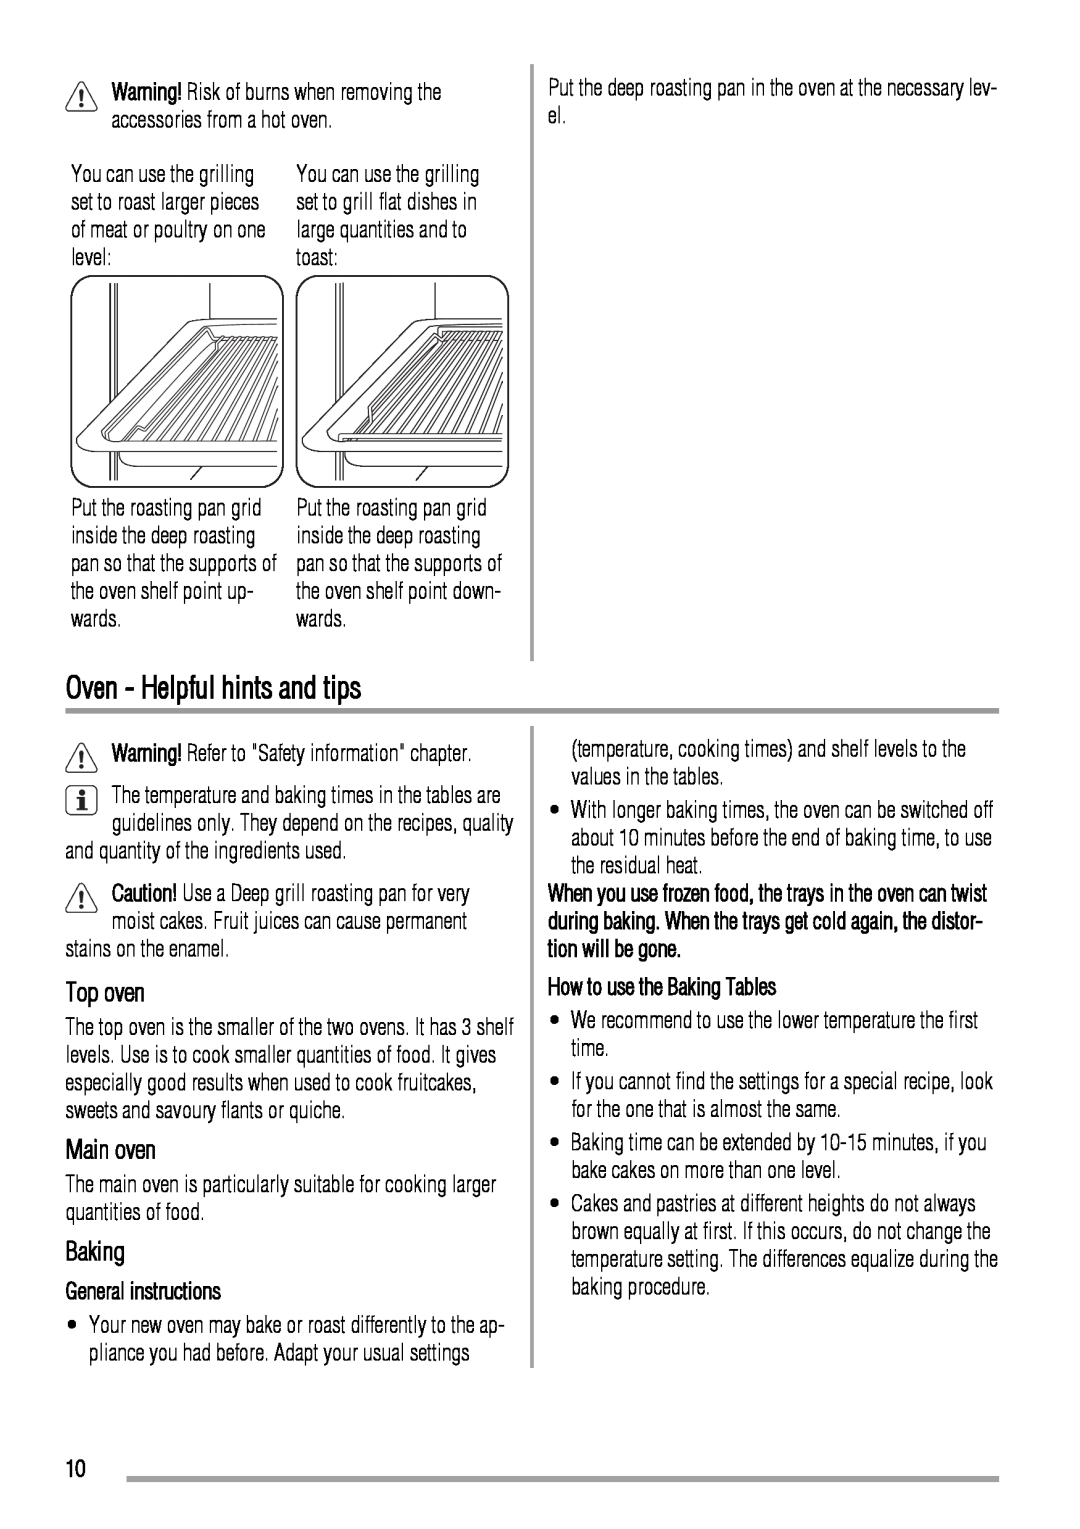 Zanussi ZCV662 user manual Oven - Helpful hints and tips, Top oven, Main oven, Baking, General instructions 